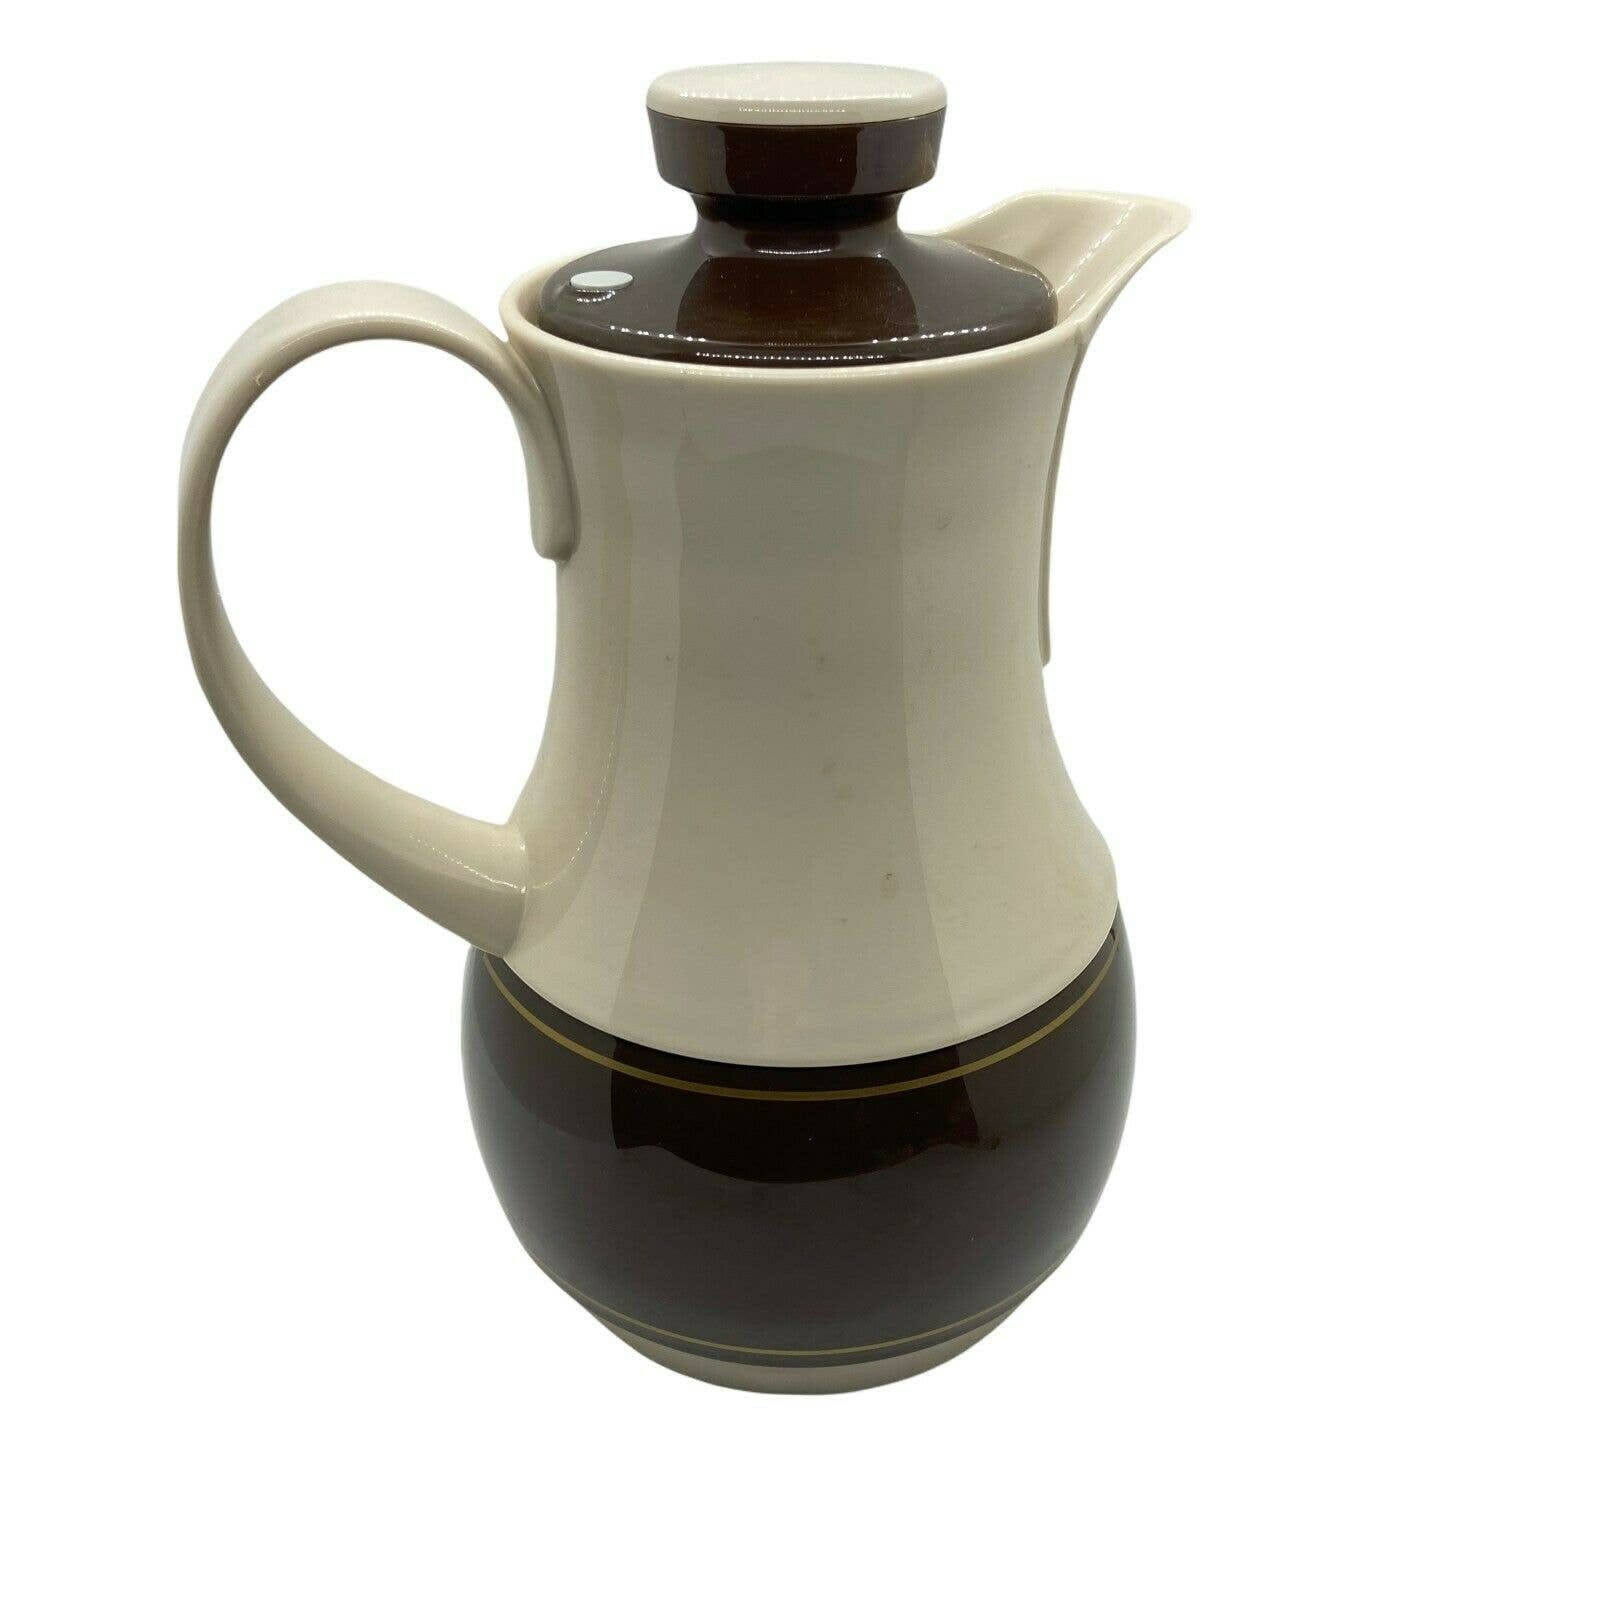 Vintage Ceramic Thermos Coffee Pot with Metal Cover, Germany